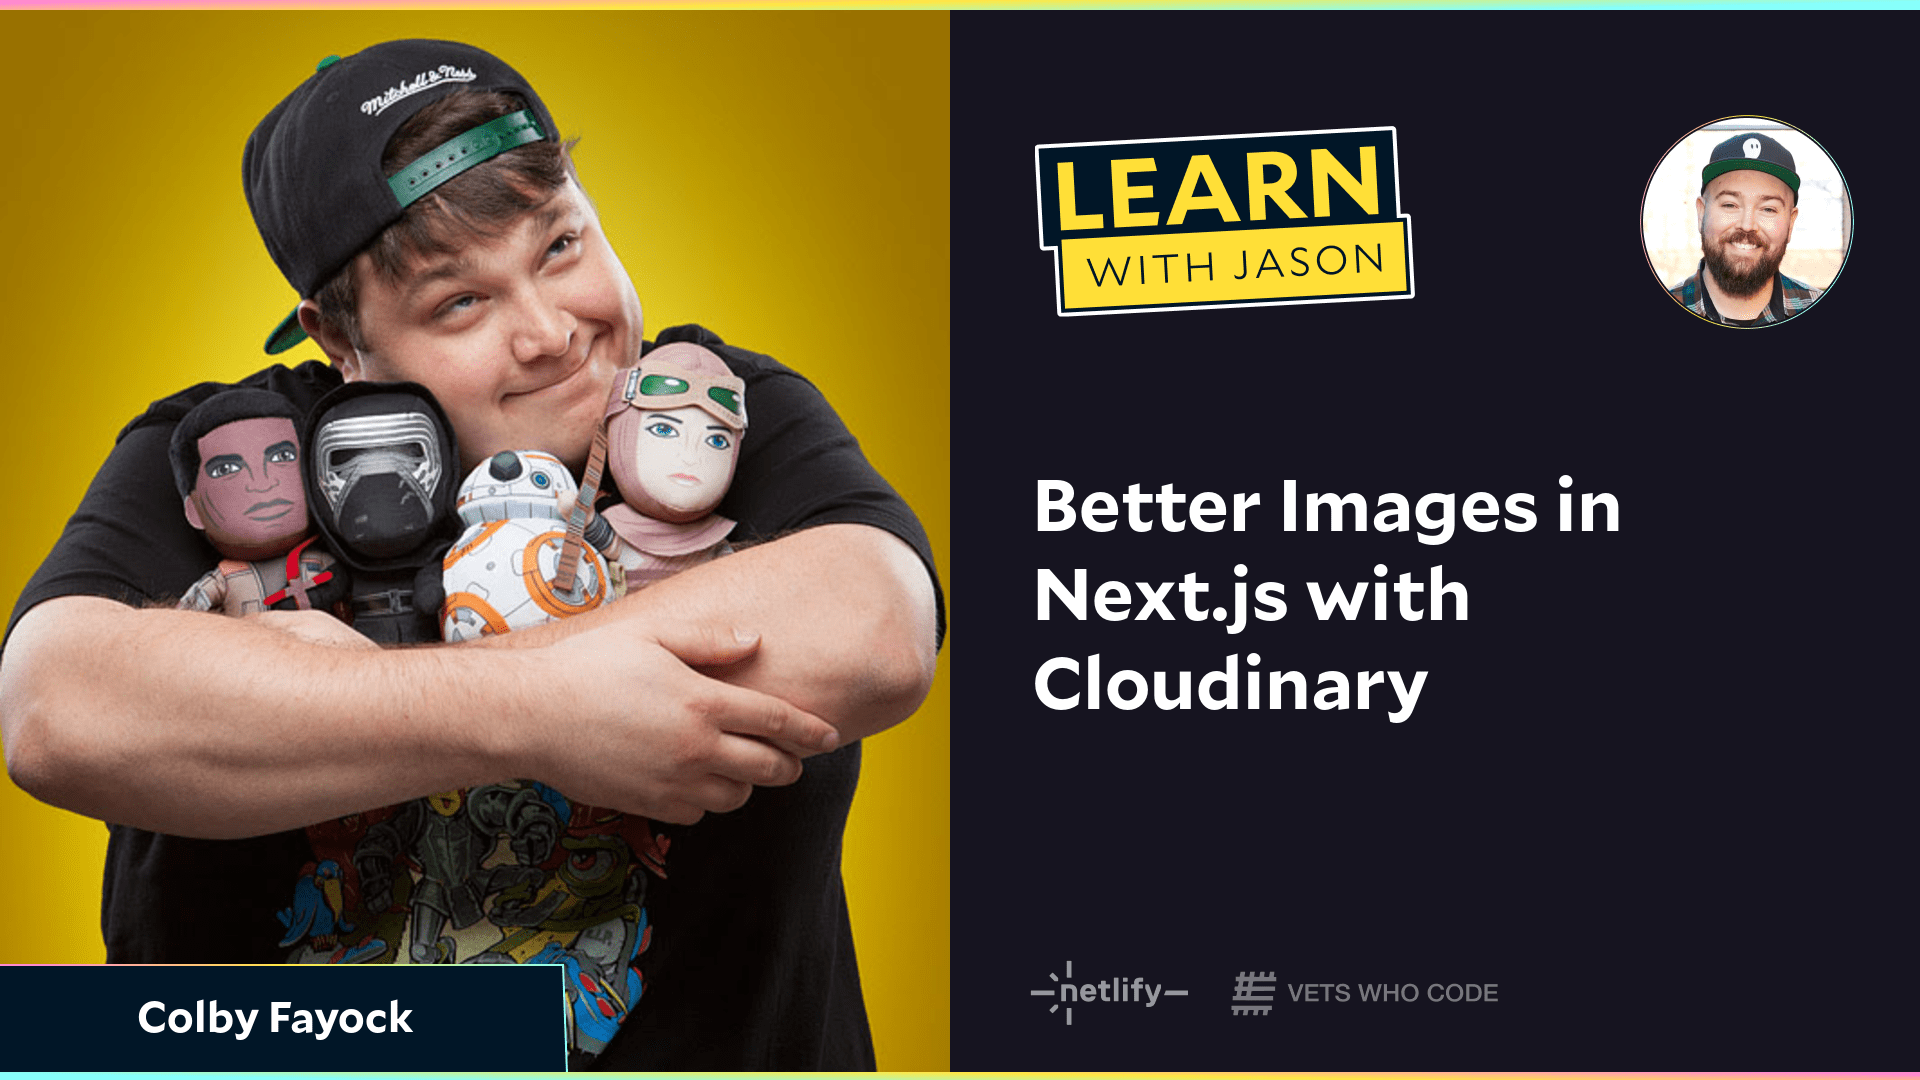 Better Images in Next.js with Cloudinary (with Colby Fayock)